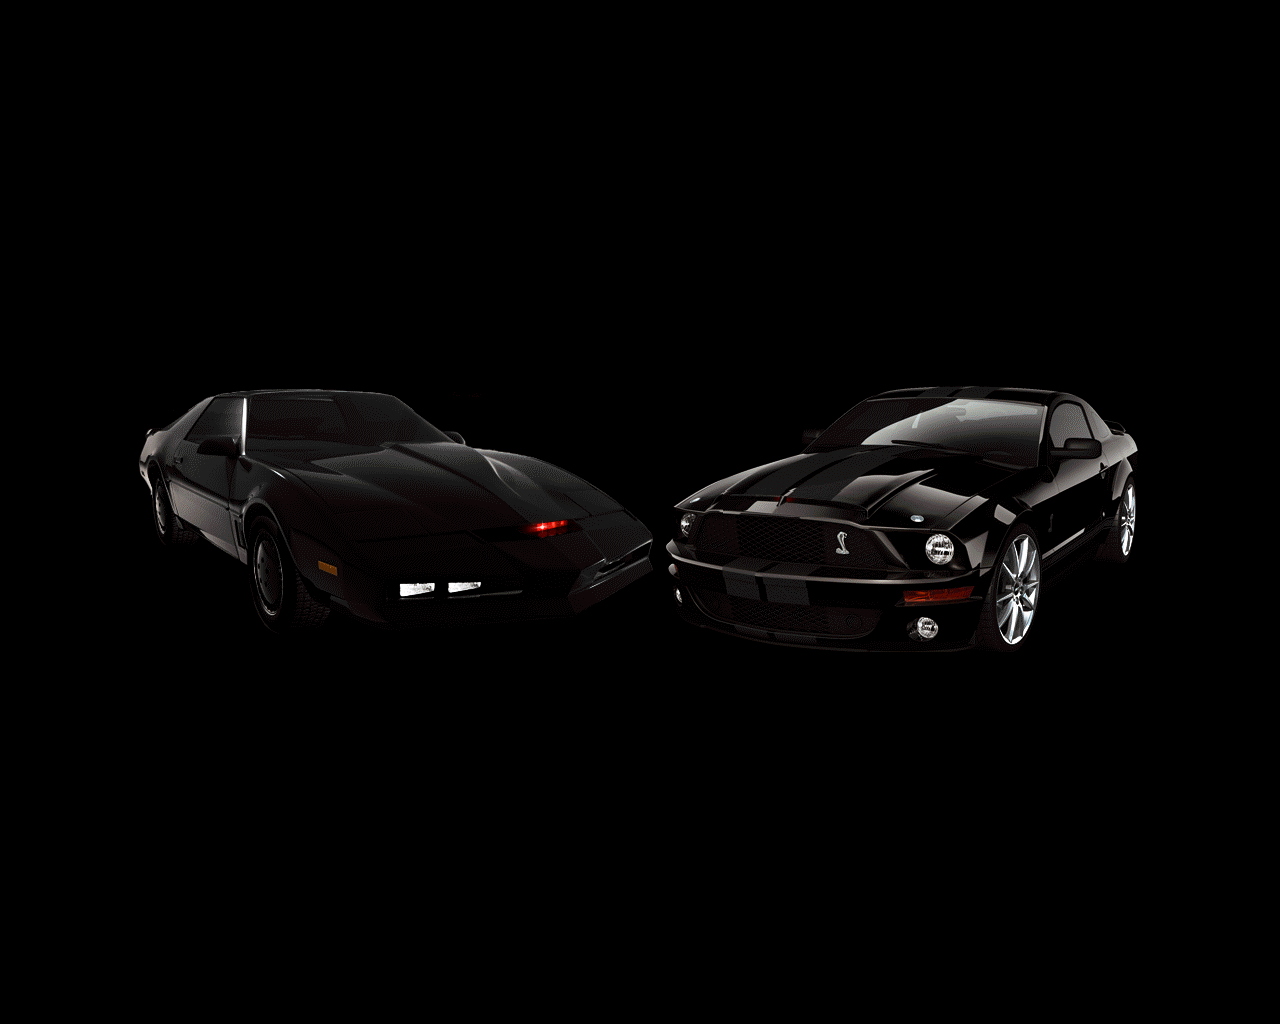 'knight rider' 2008 vfx in high gear animation world on wallpapers hd knight rider gif